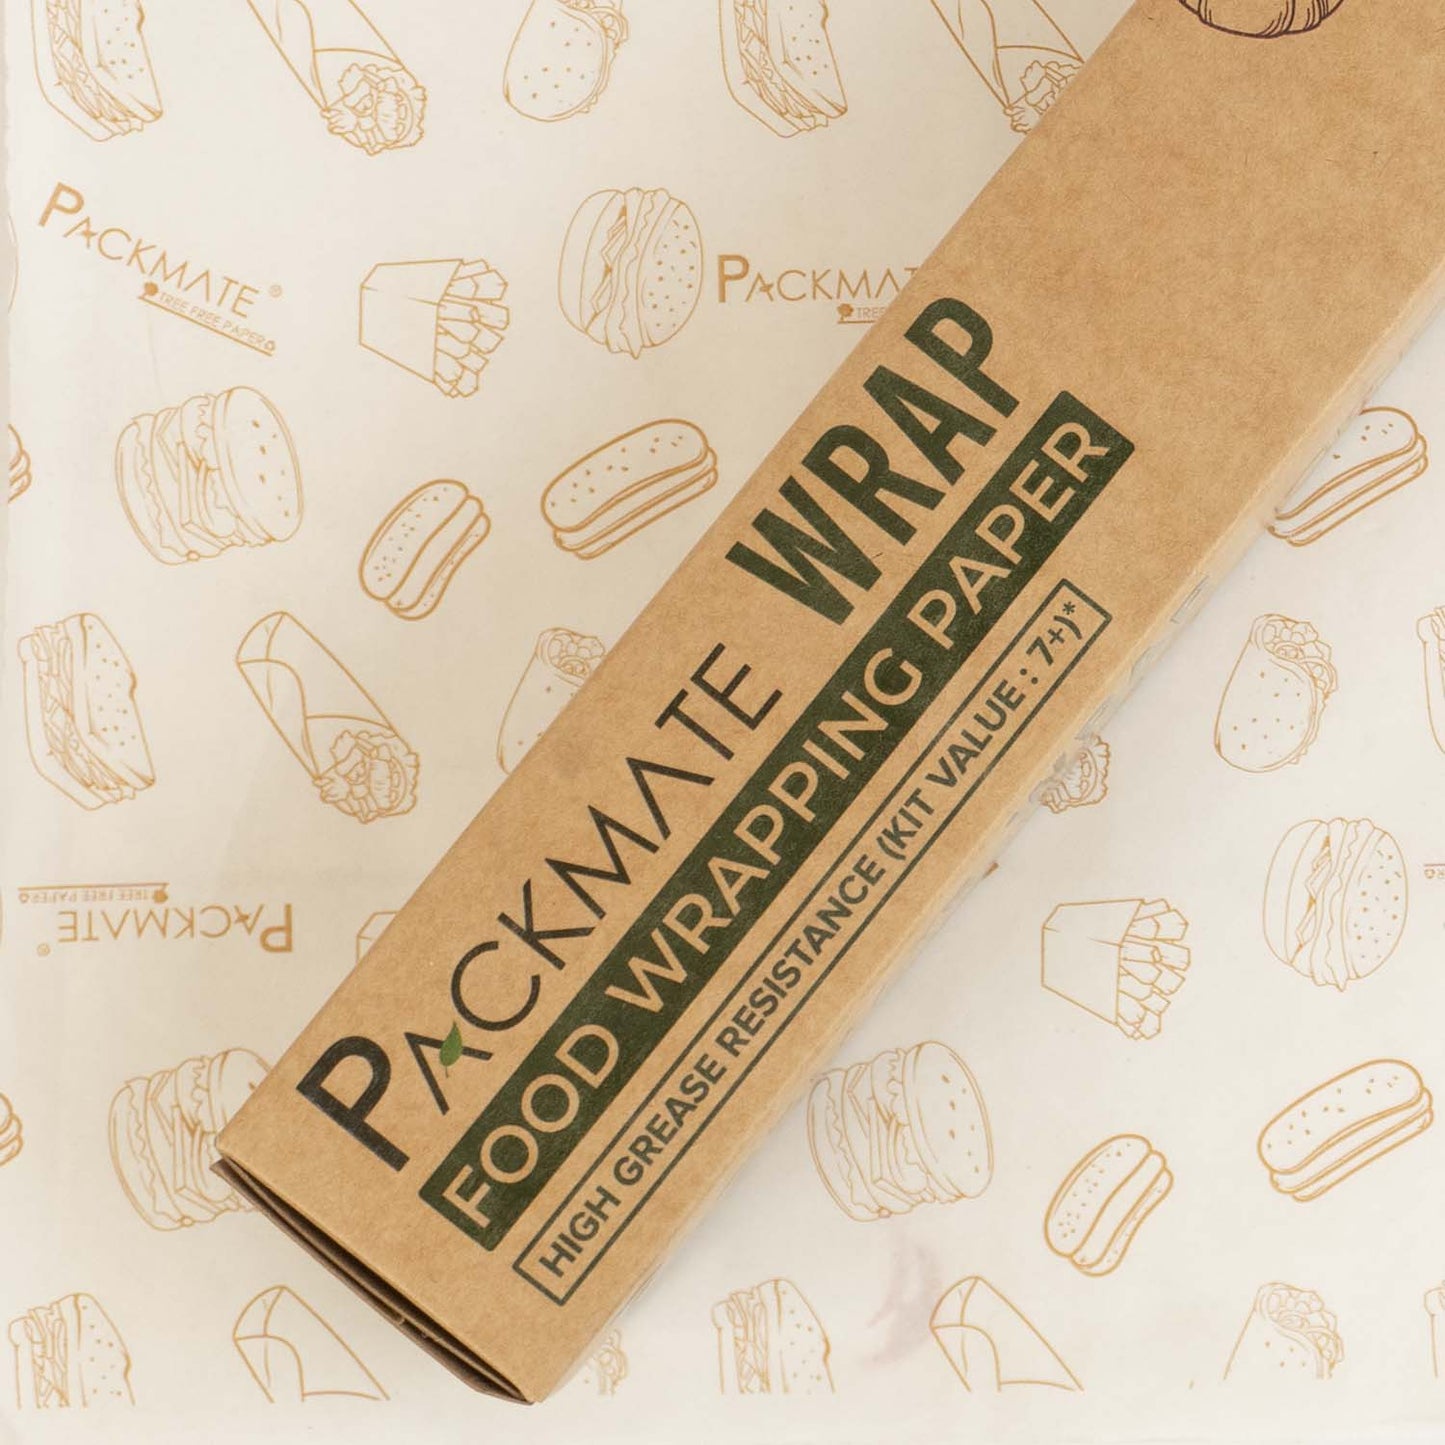 Packmate Wrap - Greaseproof Food Wraping Paper, 21 (15+6) Meter Roll (Pack of 2)